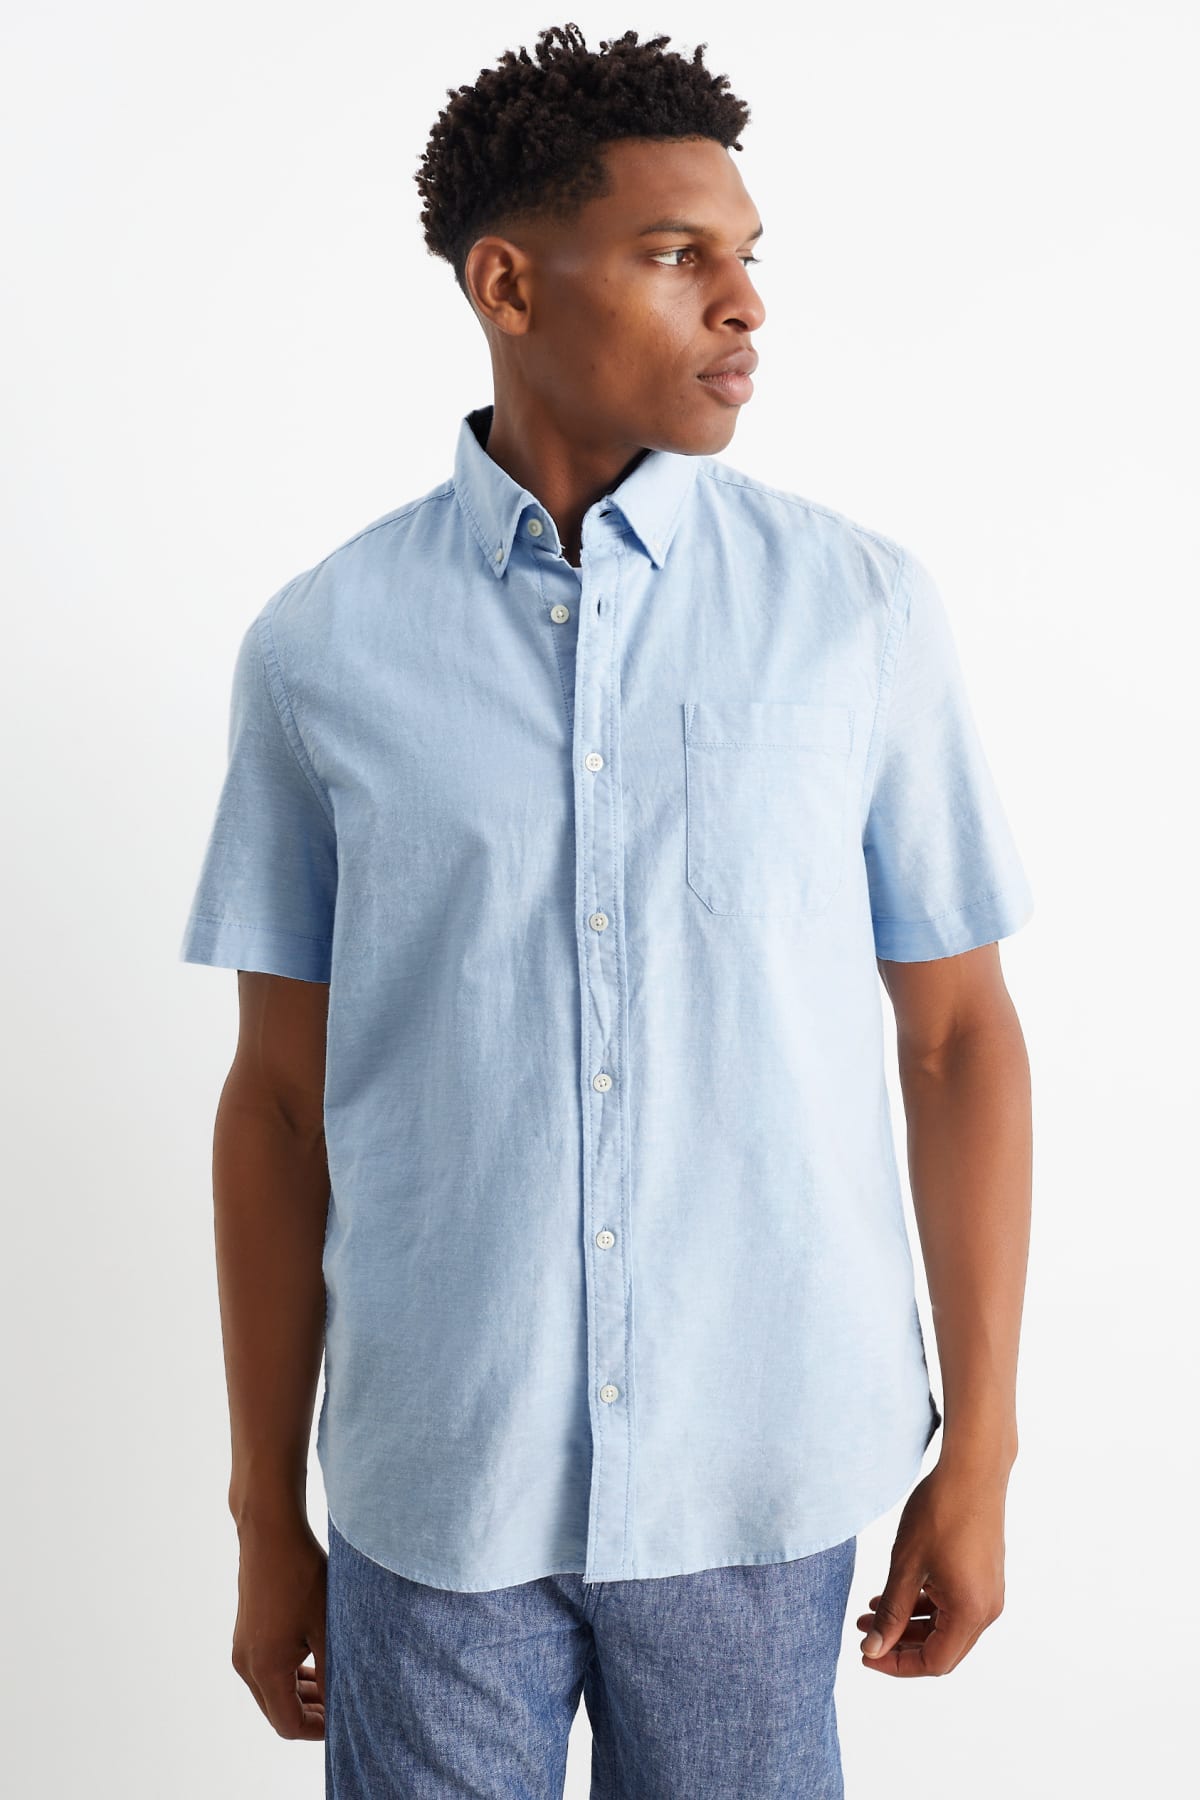 Find your perfect button down shirt here